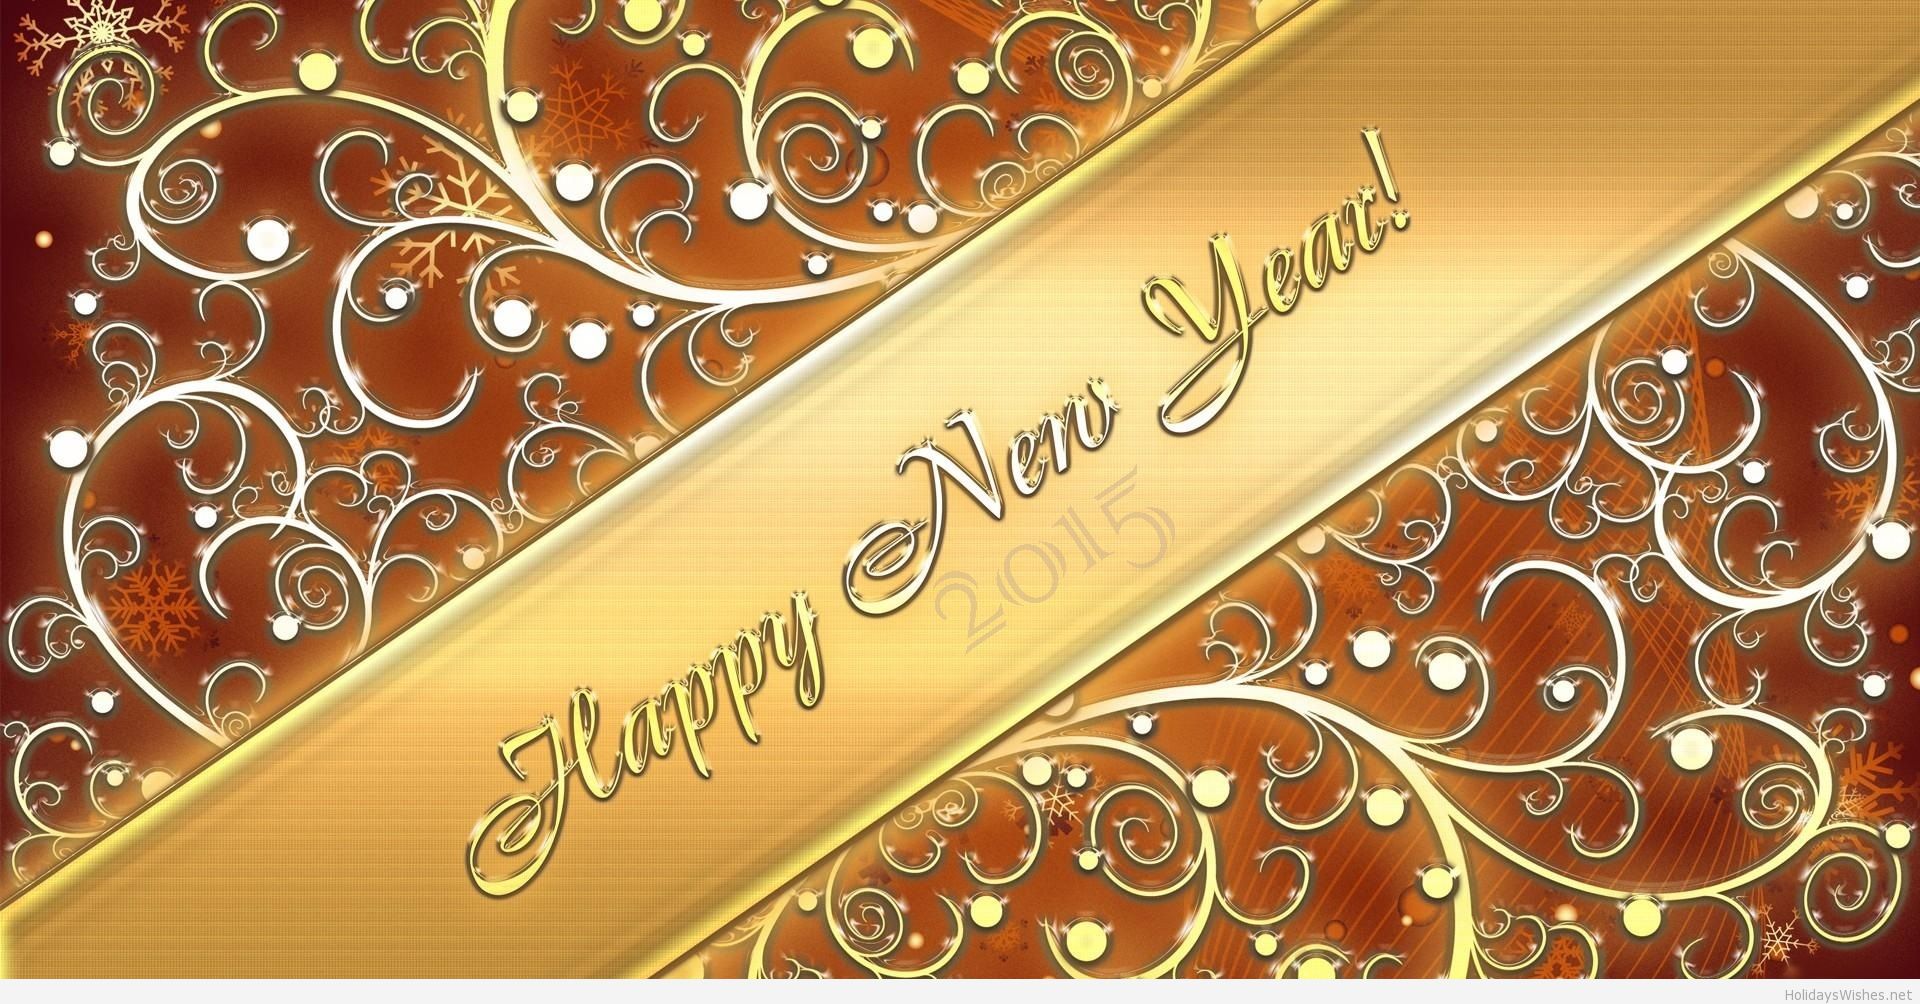 Best Colorful Happy New Year Wallpaper Smash Trends